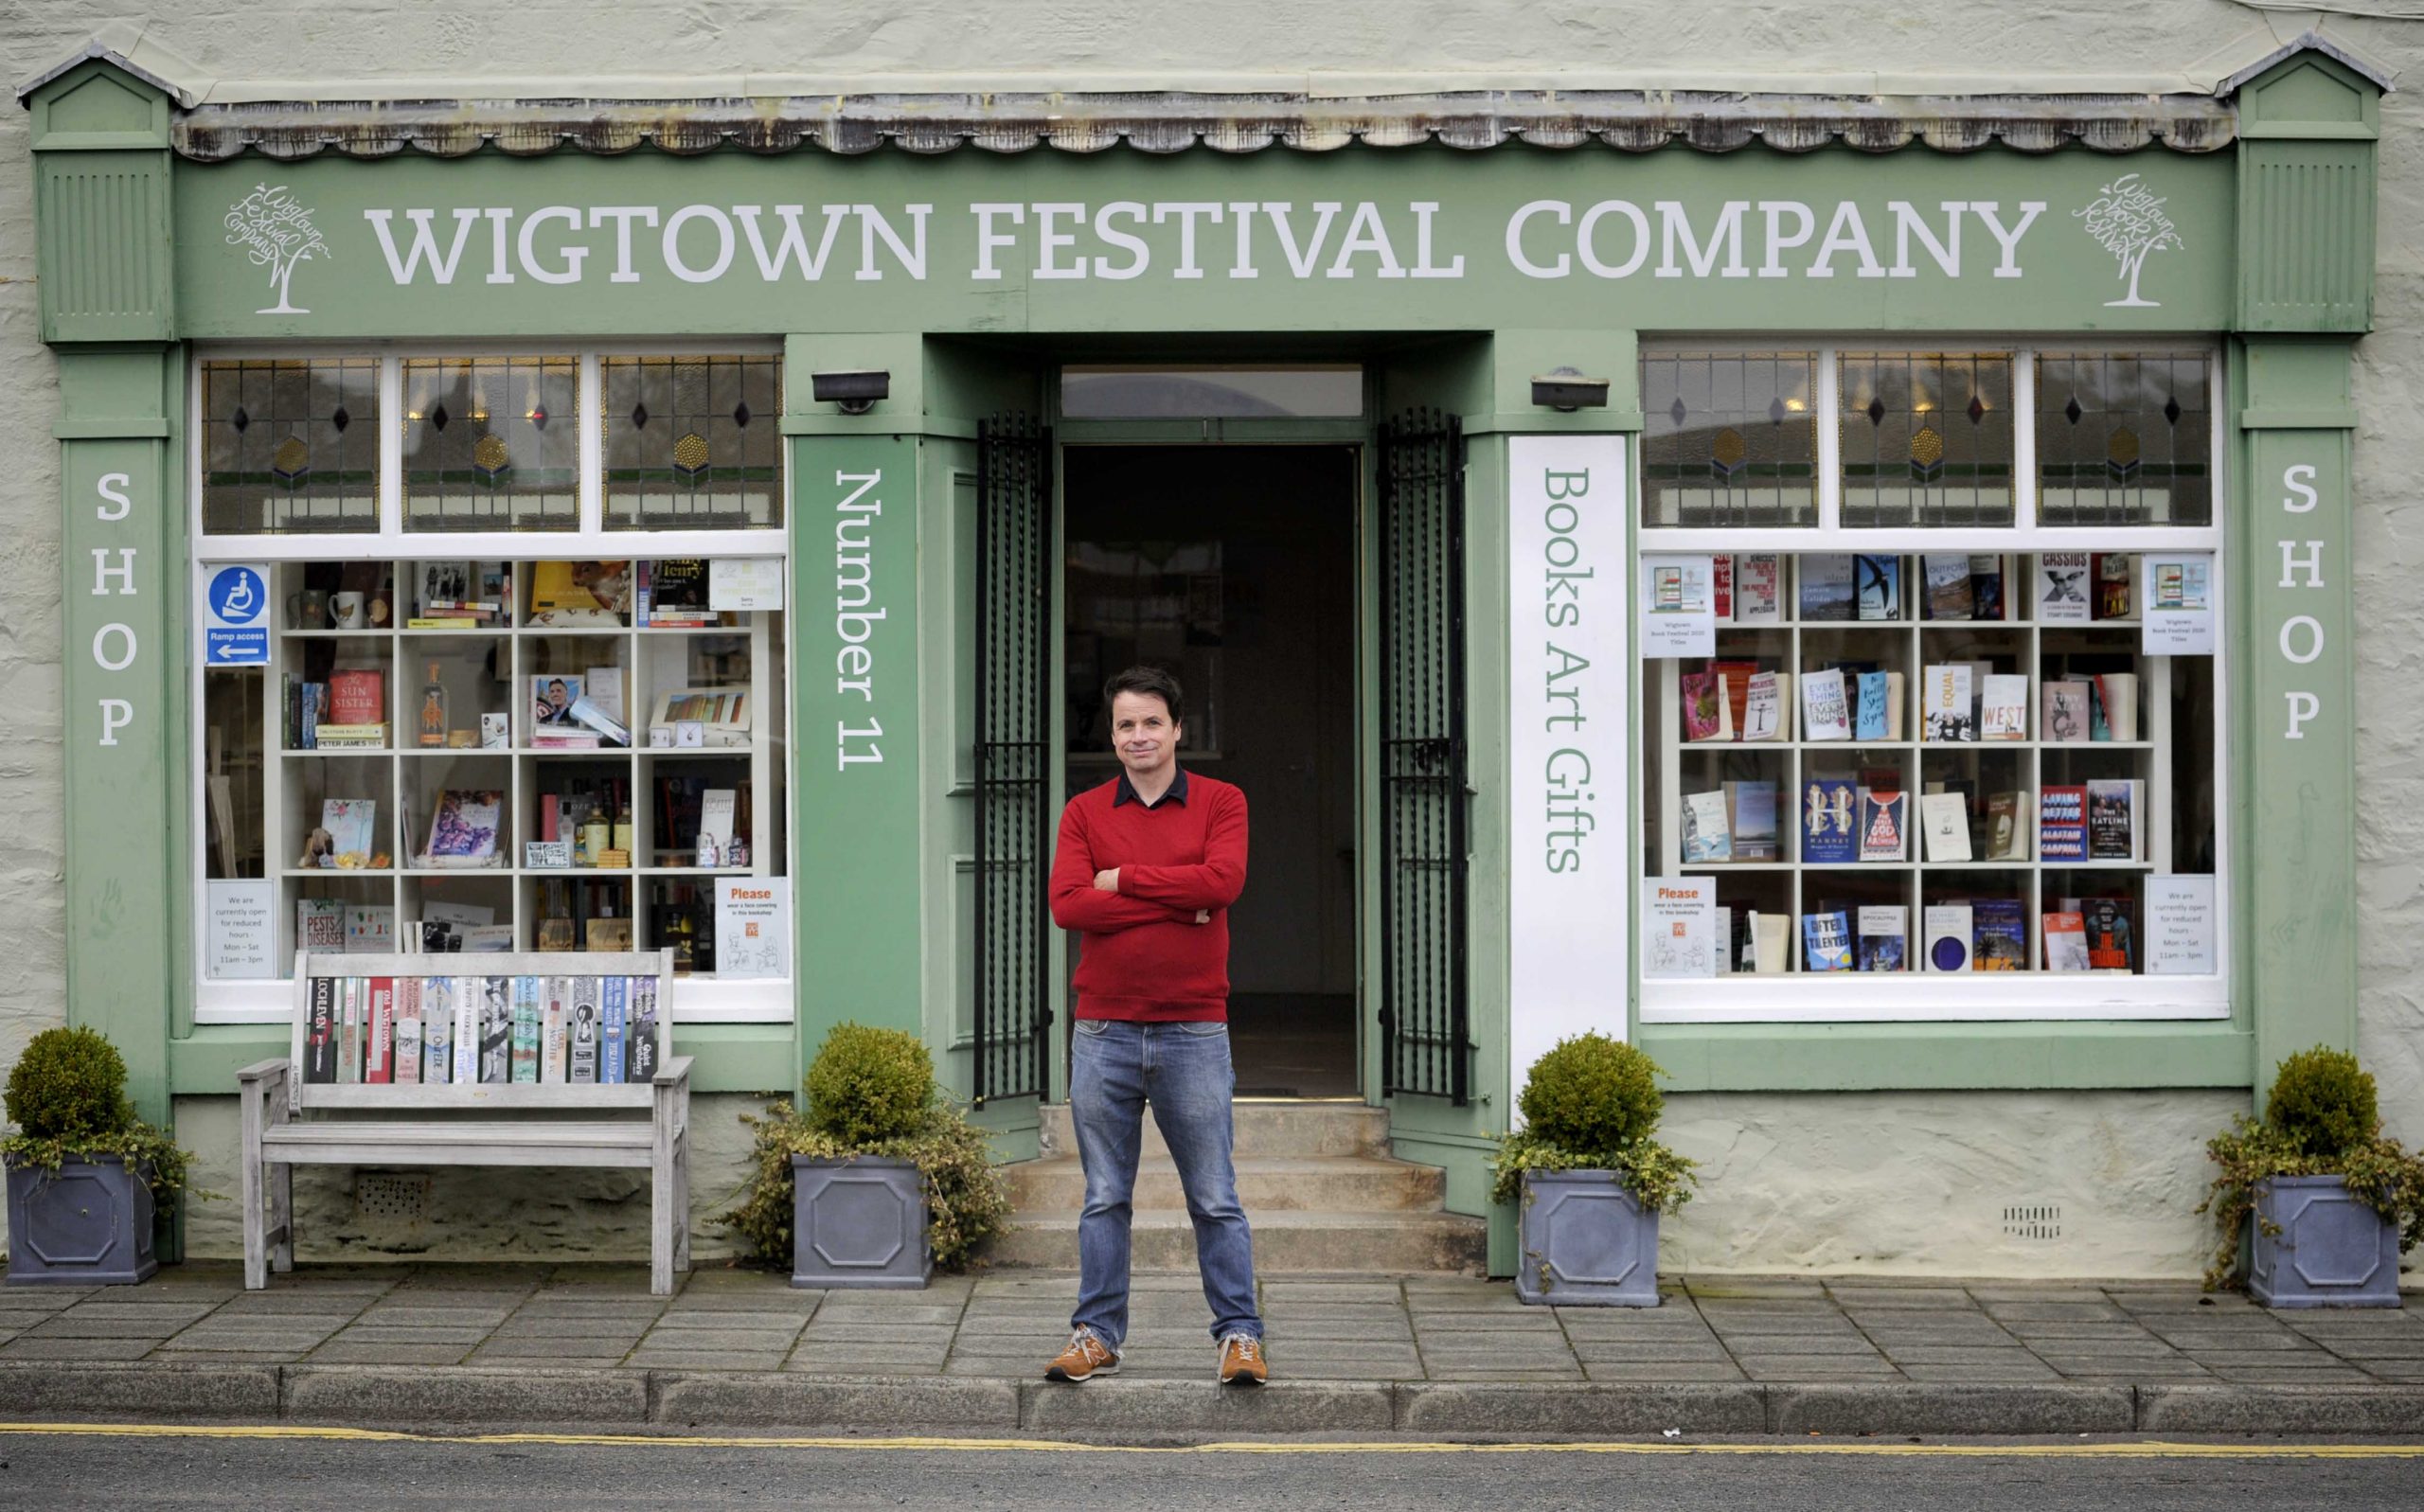 Council gives funding boost to book festival